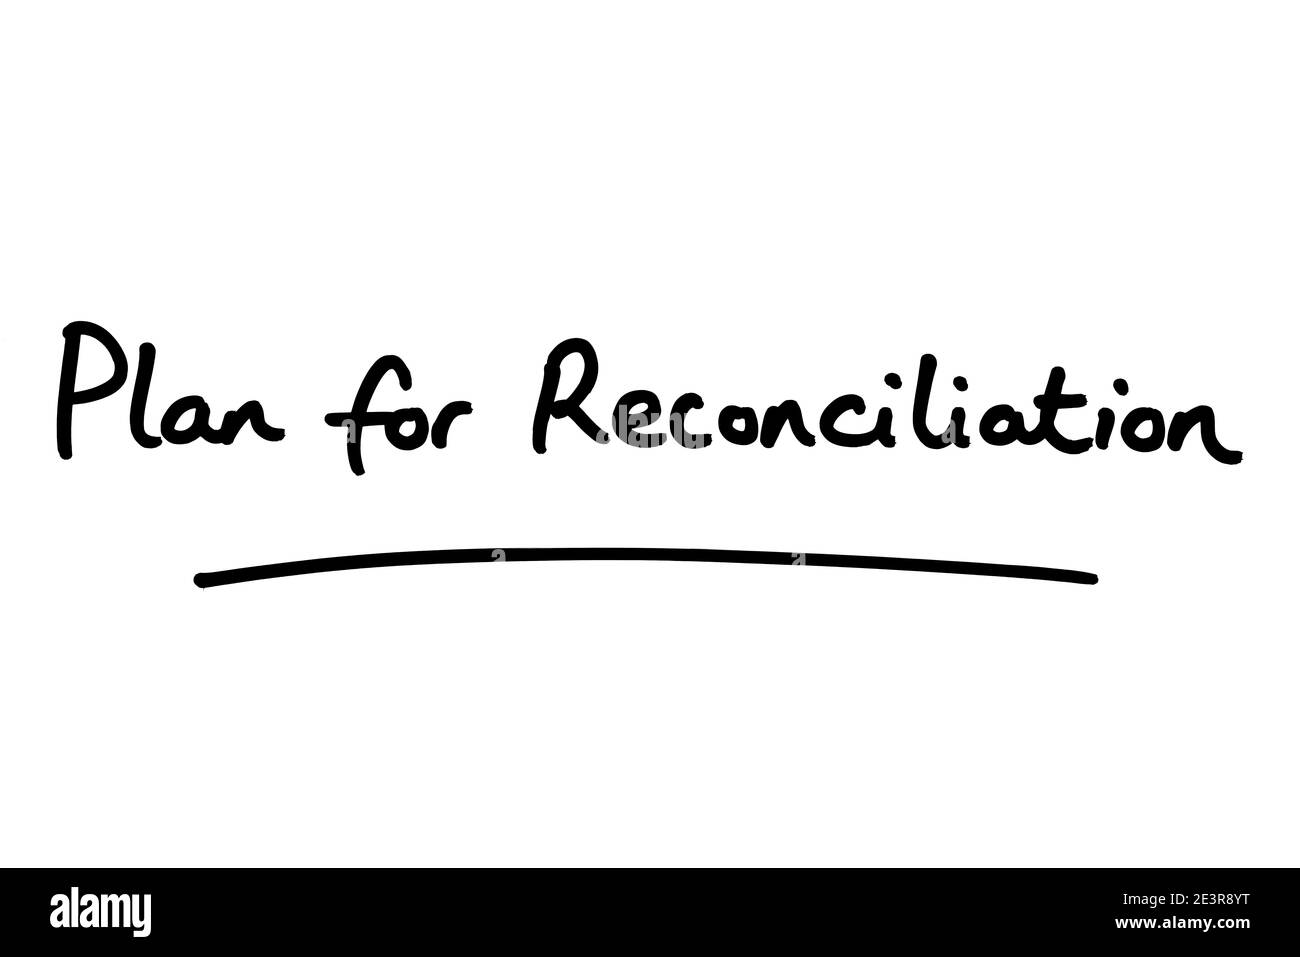 Plan for Reconciliation, handwritten on a white background. Stock Photo